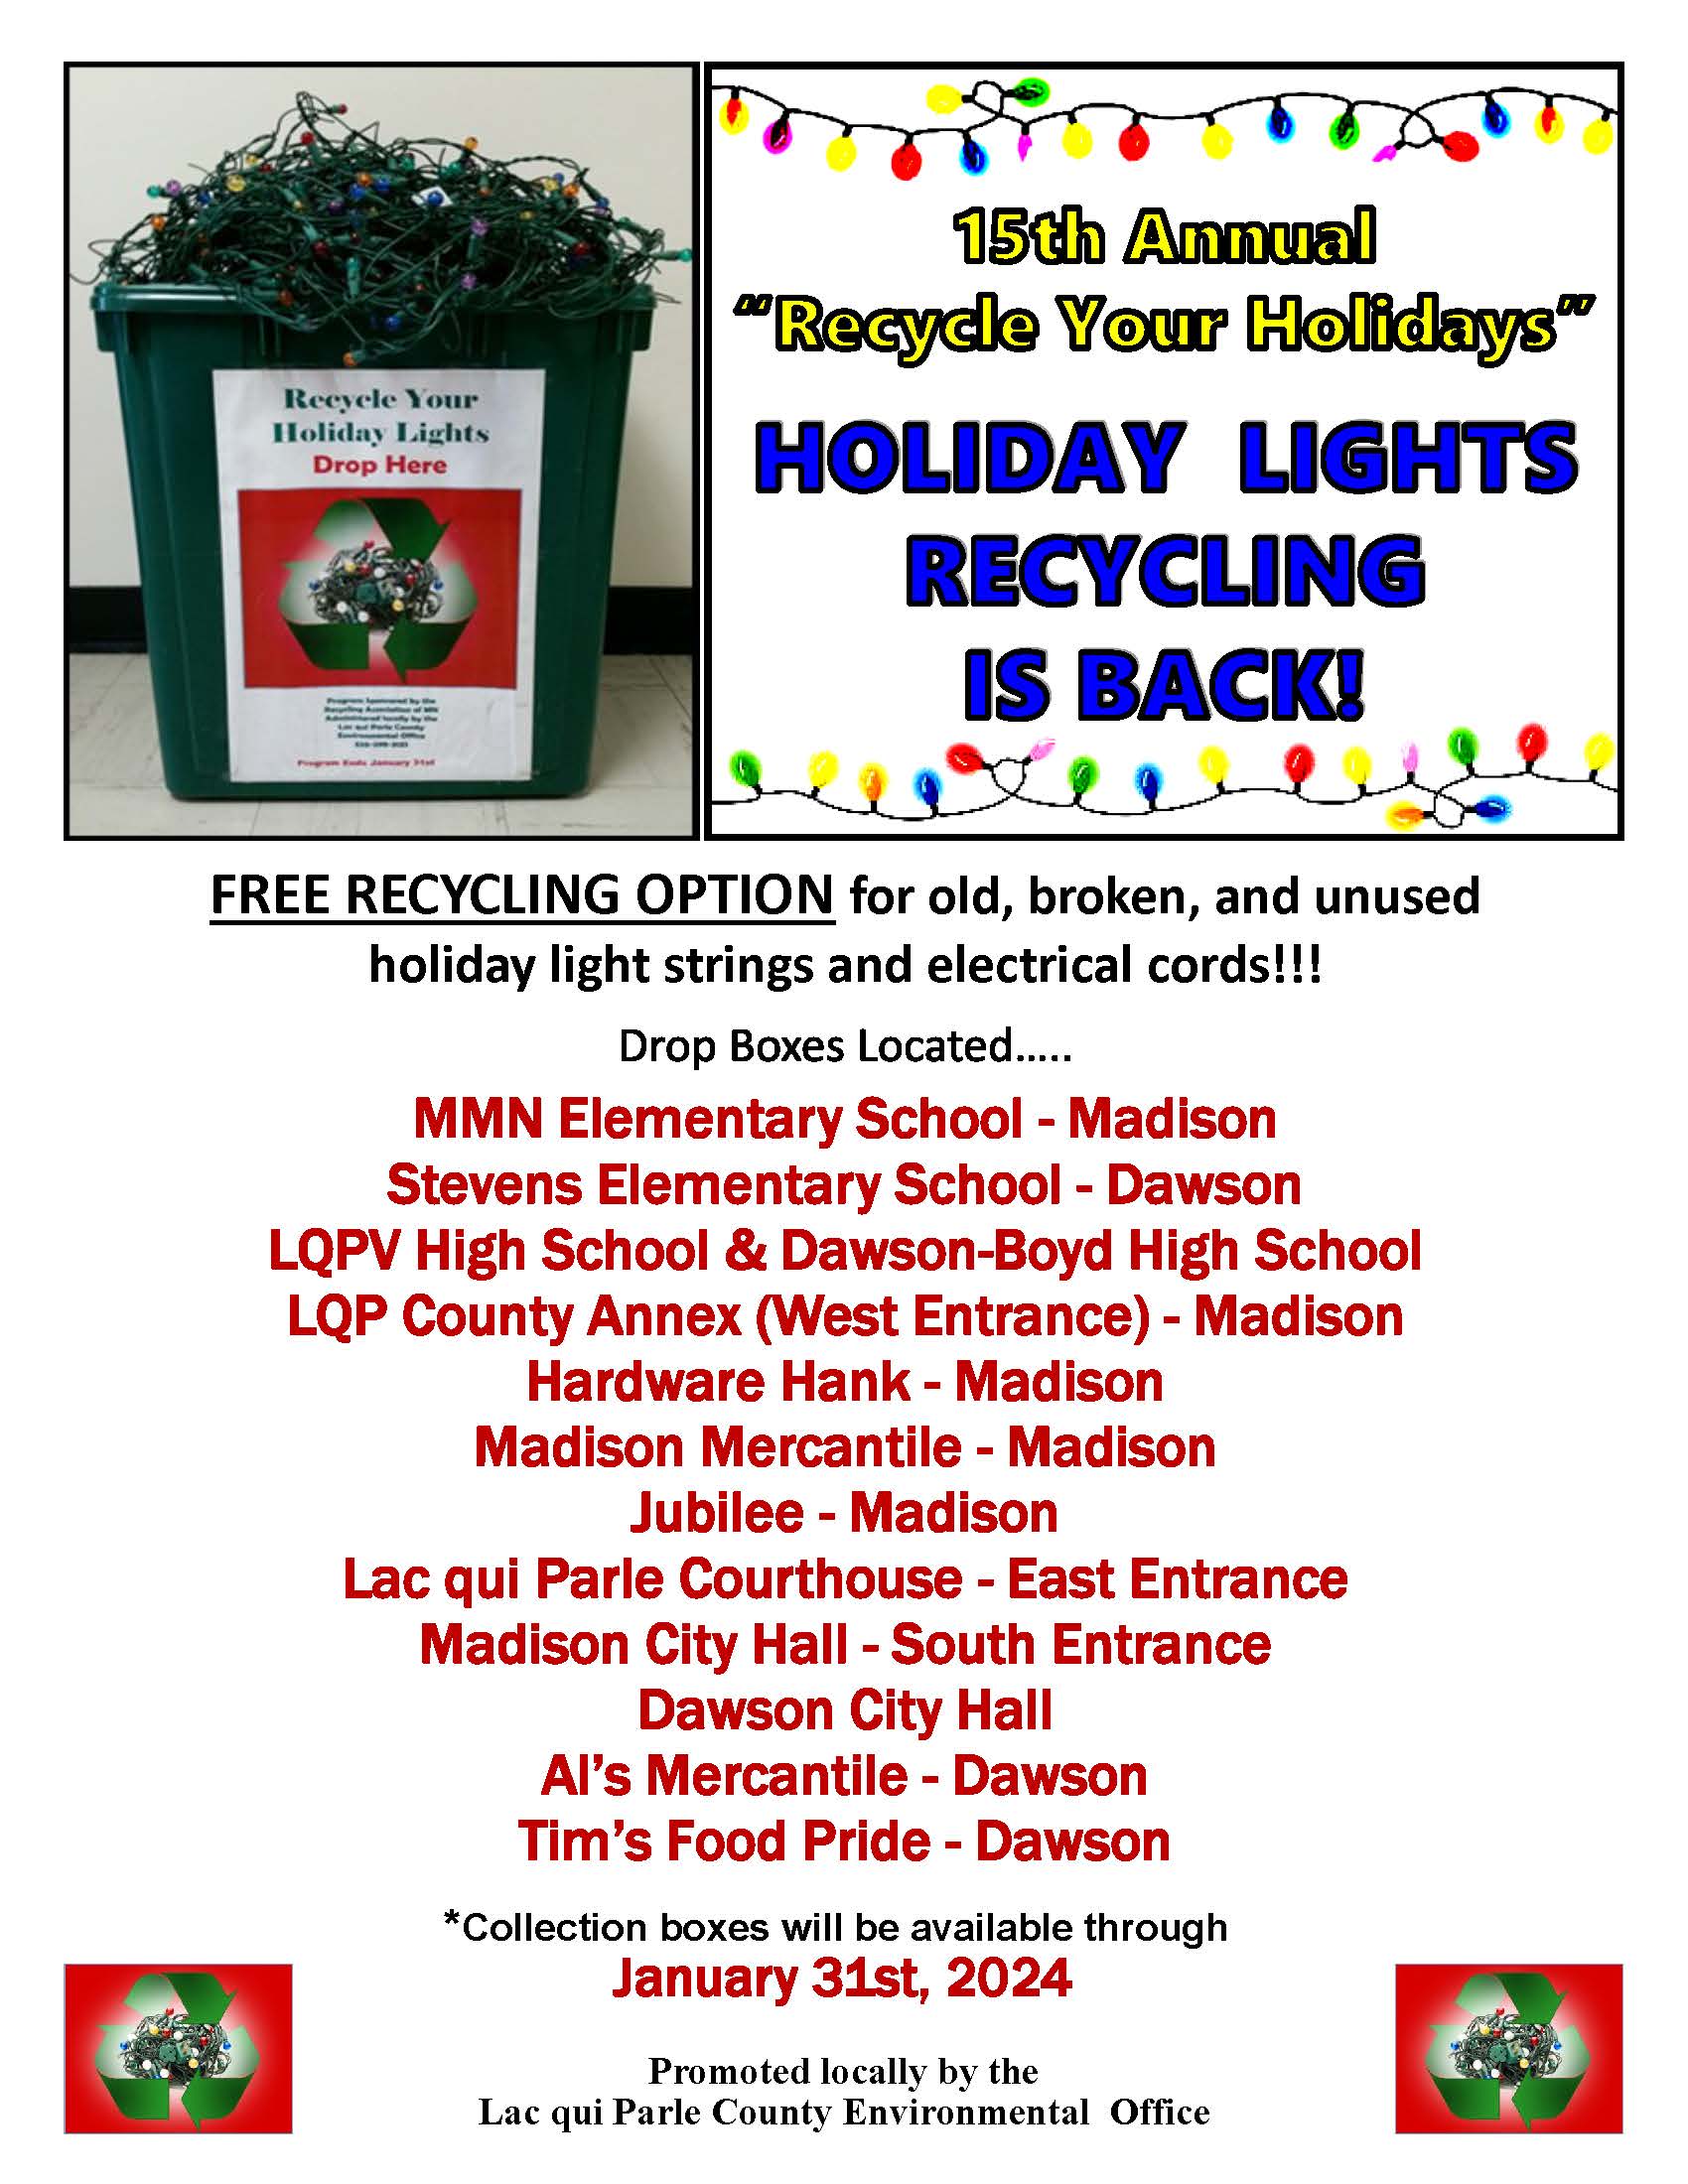 Holiday Lights Recycling - City of Madison